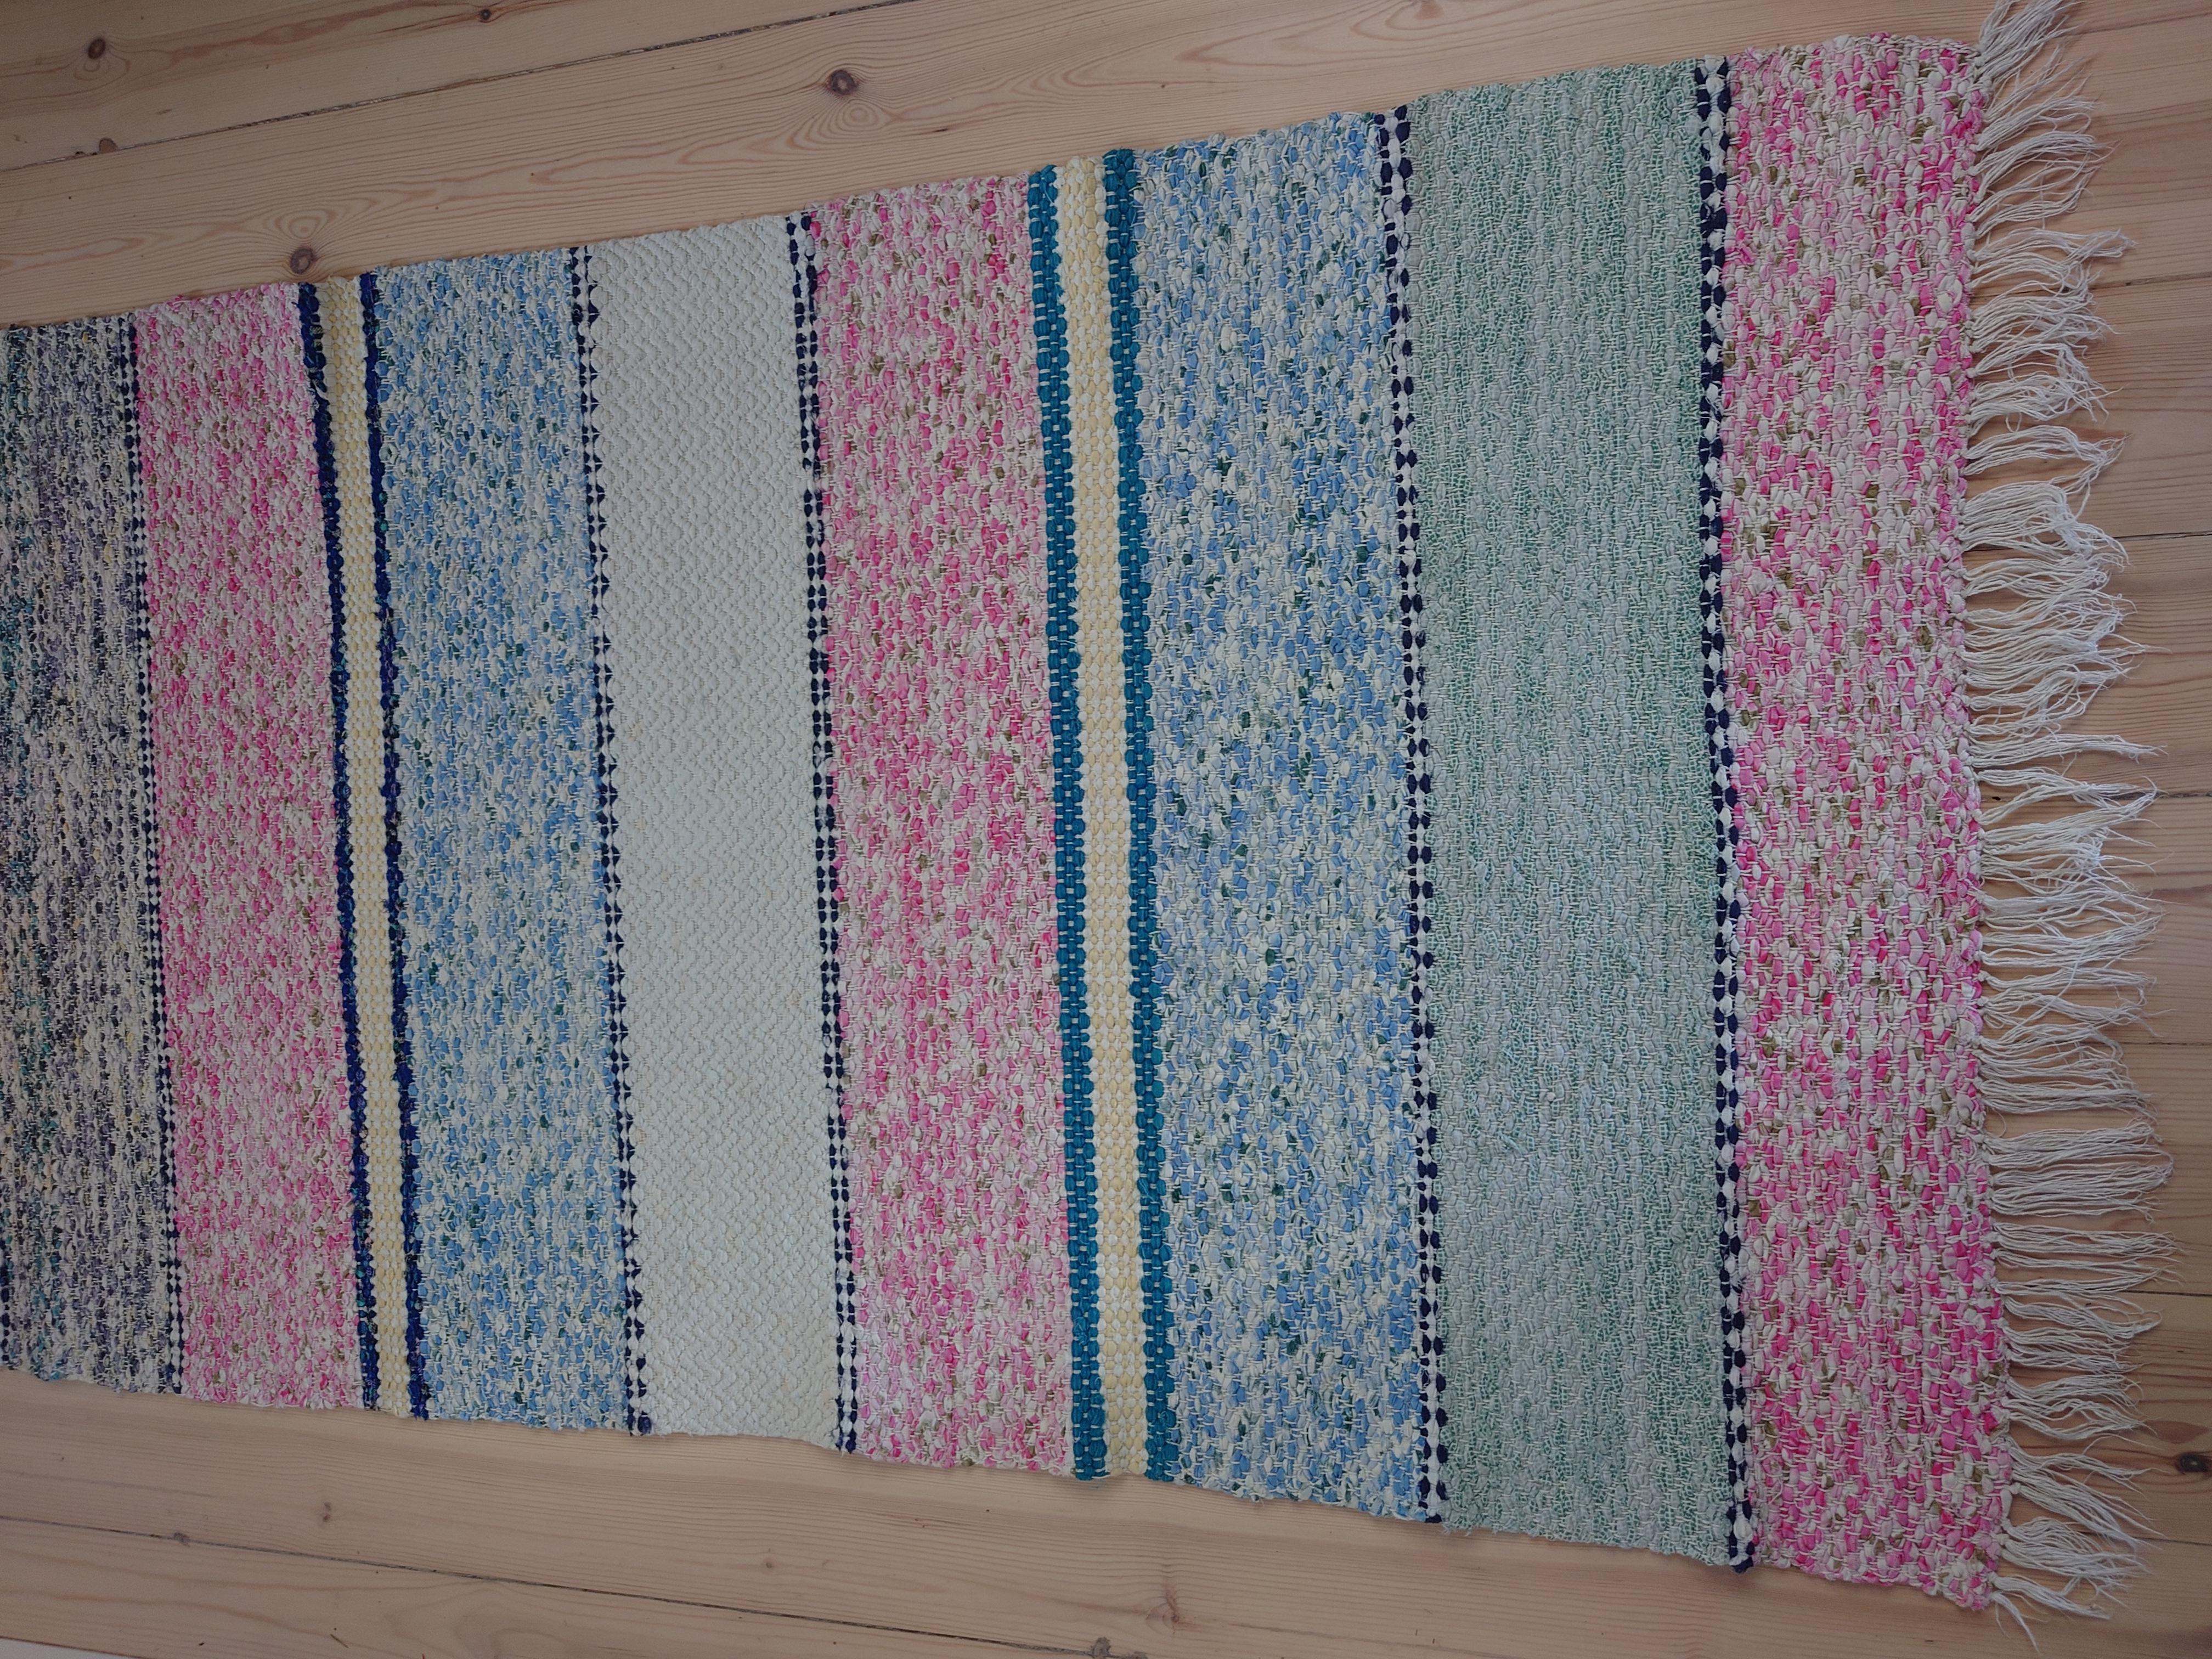 20th Century Swedish Rag Rug  Country Folk Art Hand W In Good Condition For Sale In Boden, SE